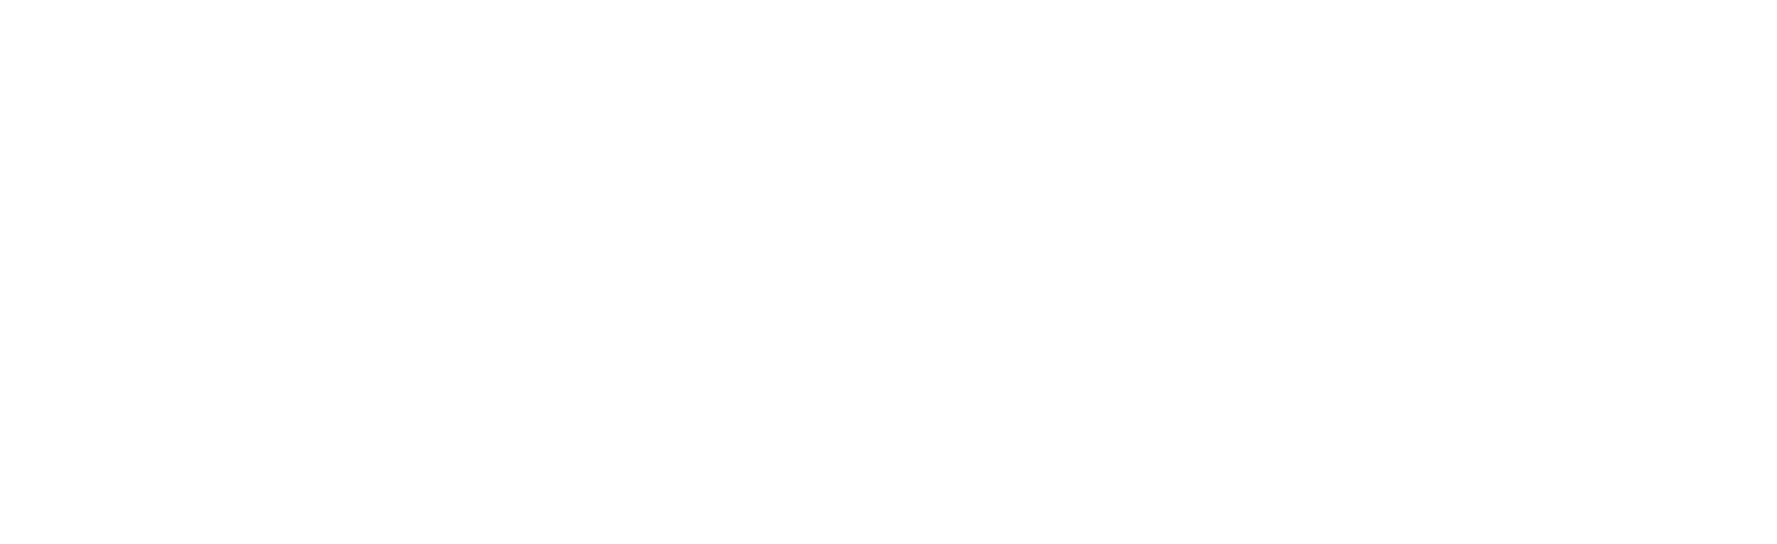 National Institute of Antimicrobial Resistance Research & Education